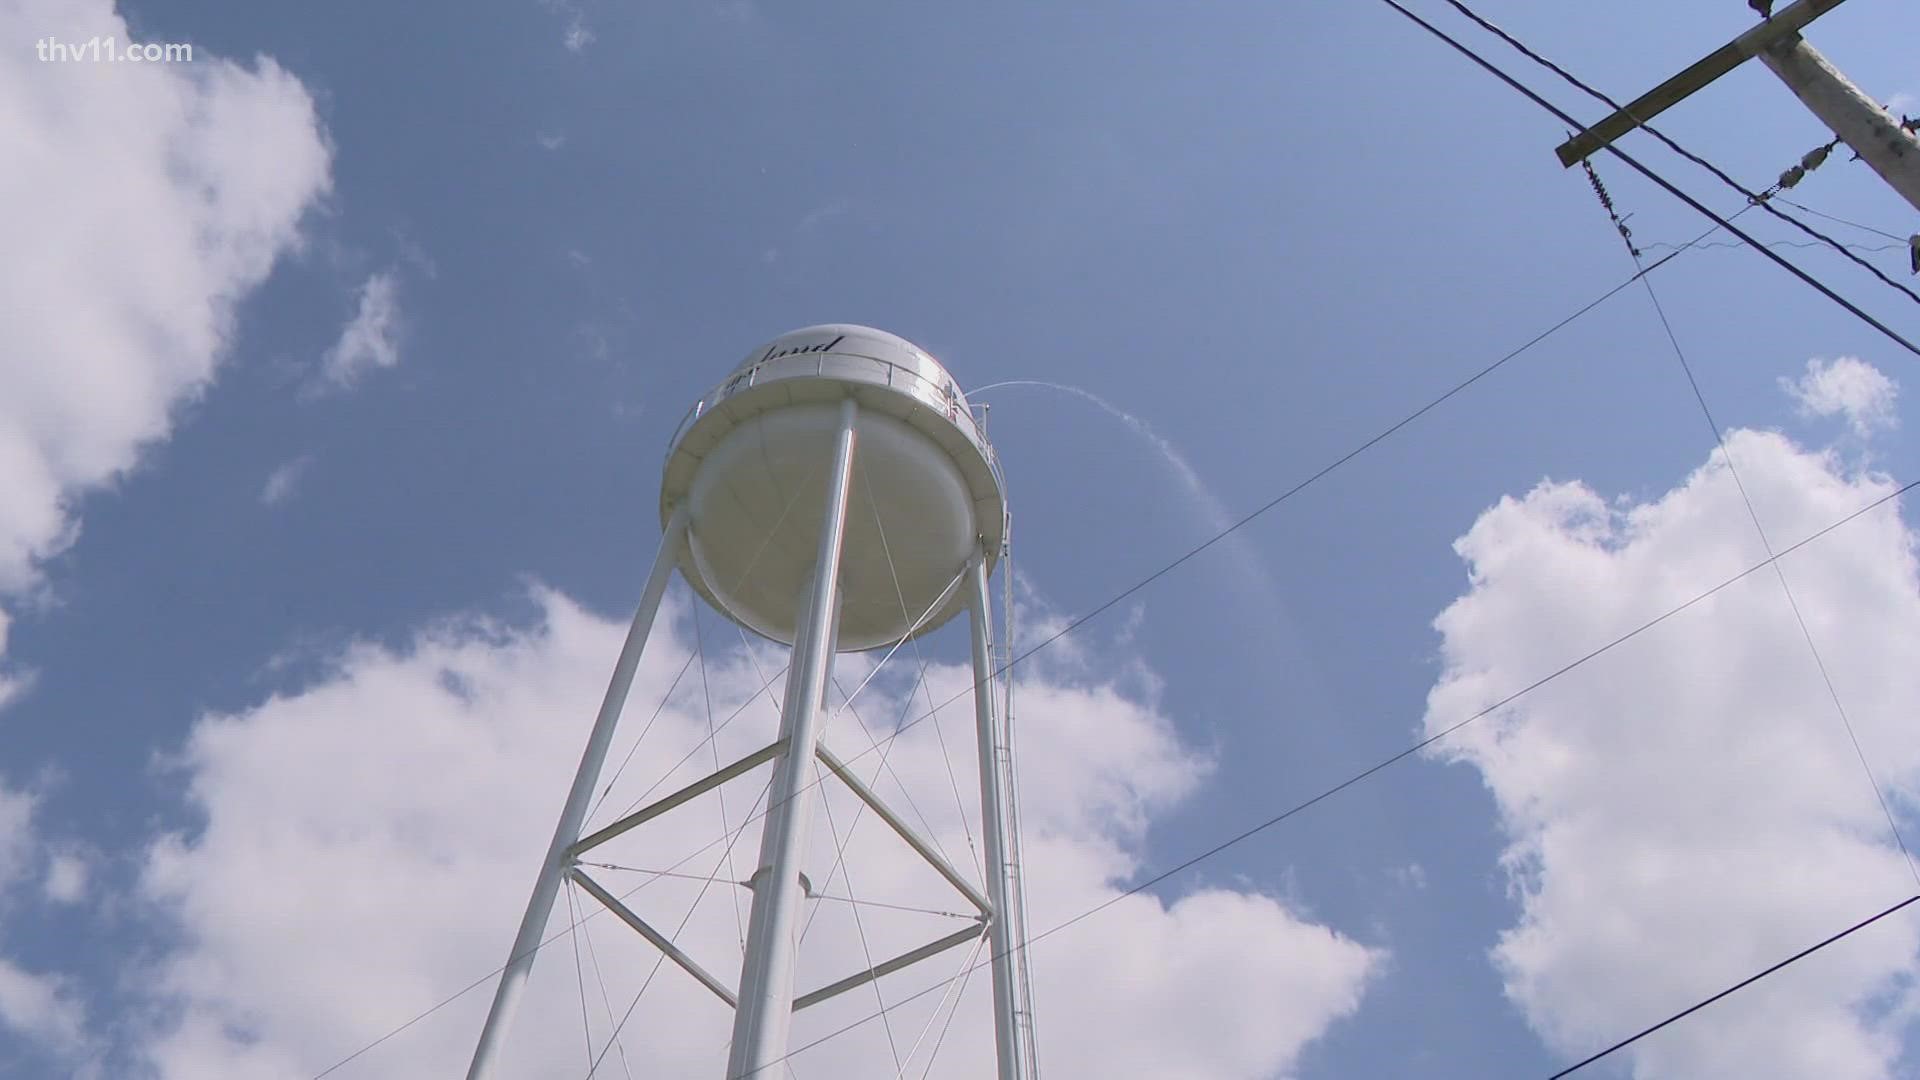 Arkansas police announced that they have arrested Timothy Sled in connection to damage of the Kingsland water tower.